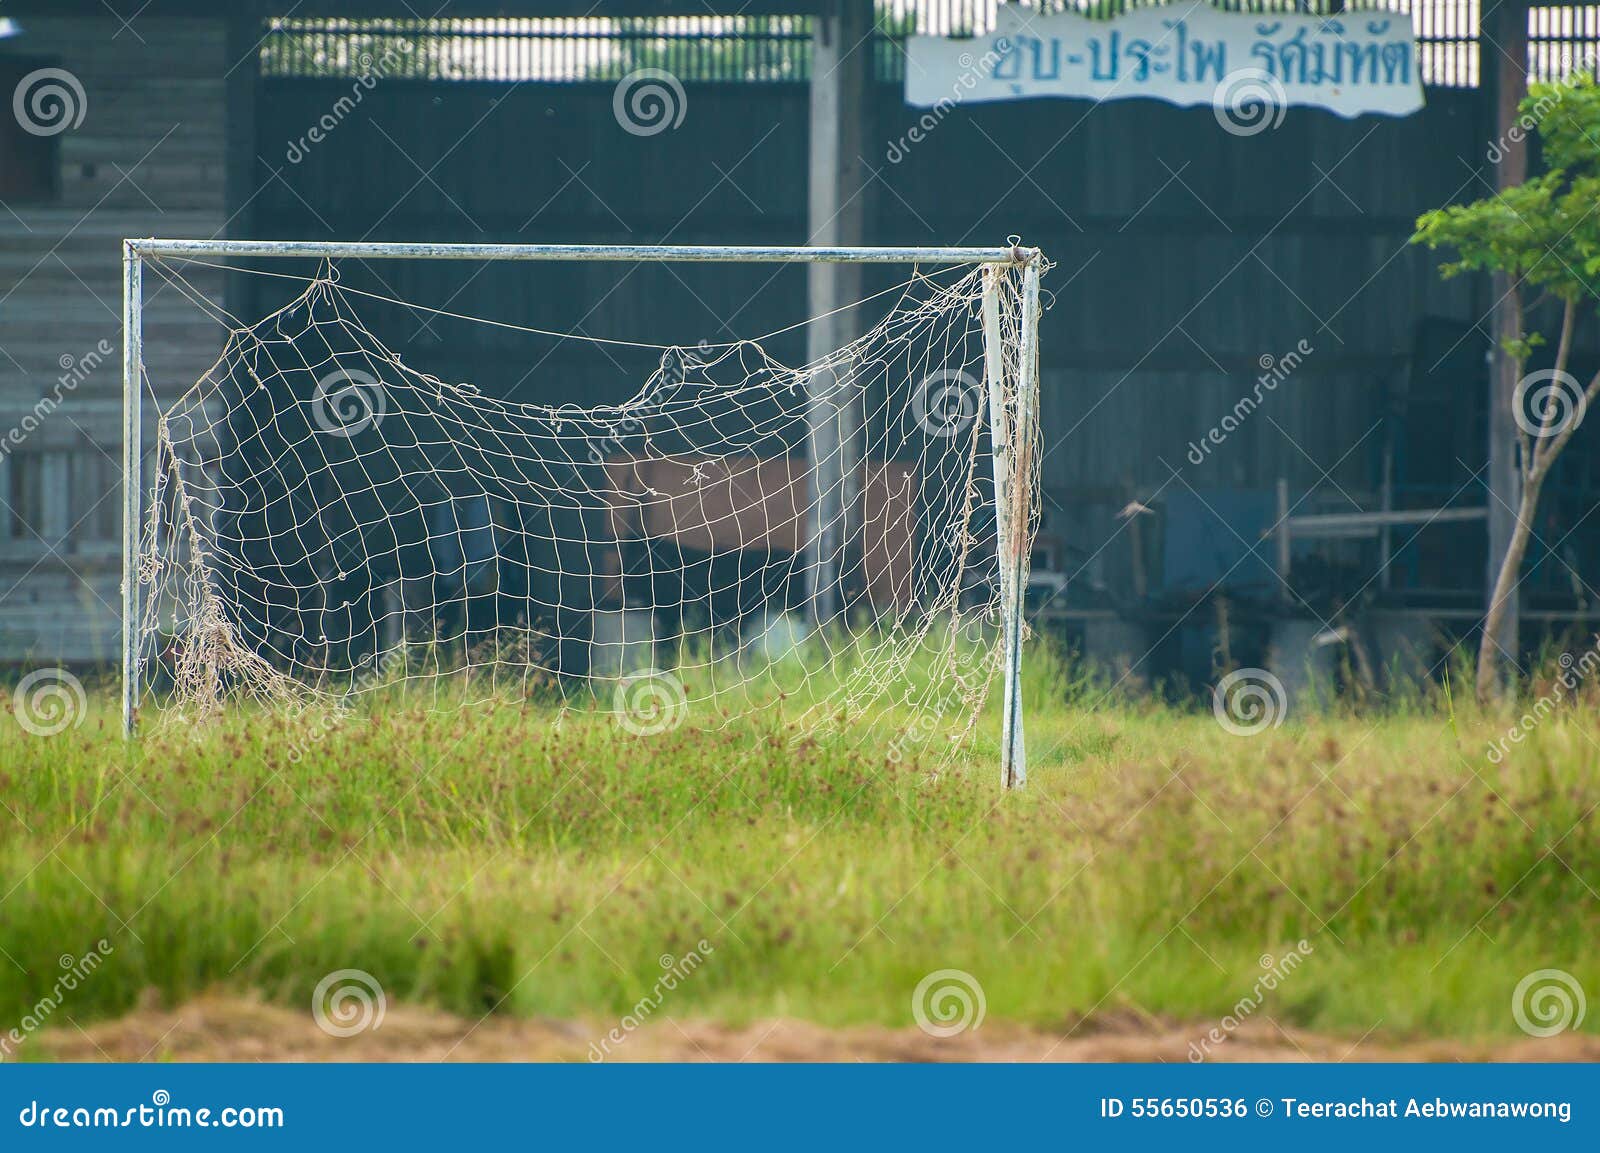 neglected empty soccer football net on field , unused, dilapidated , old goal